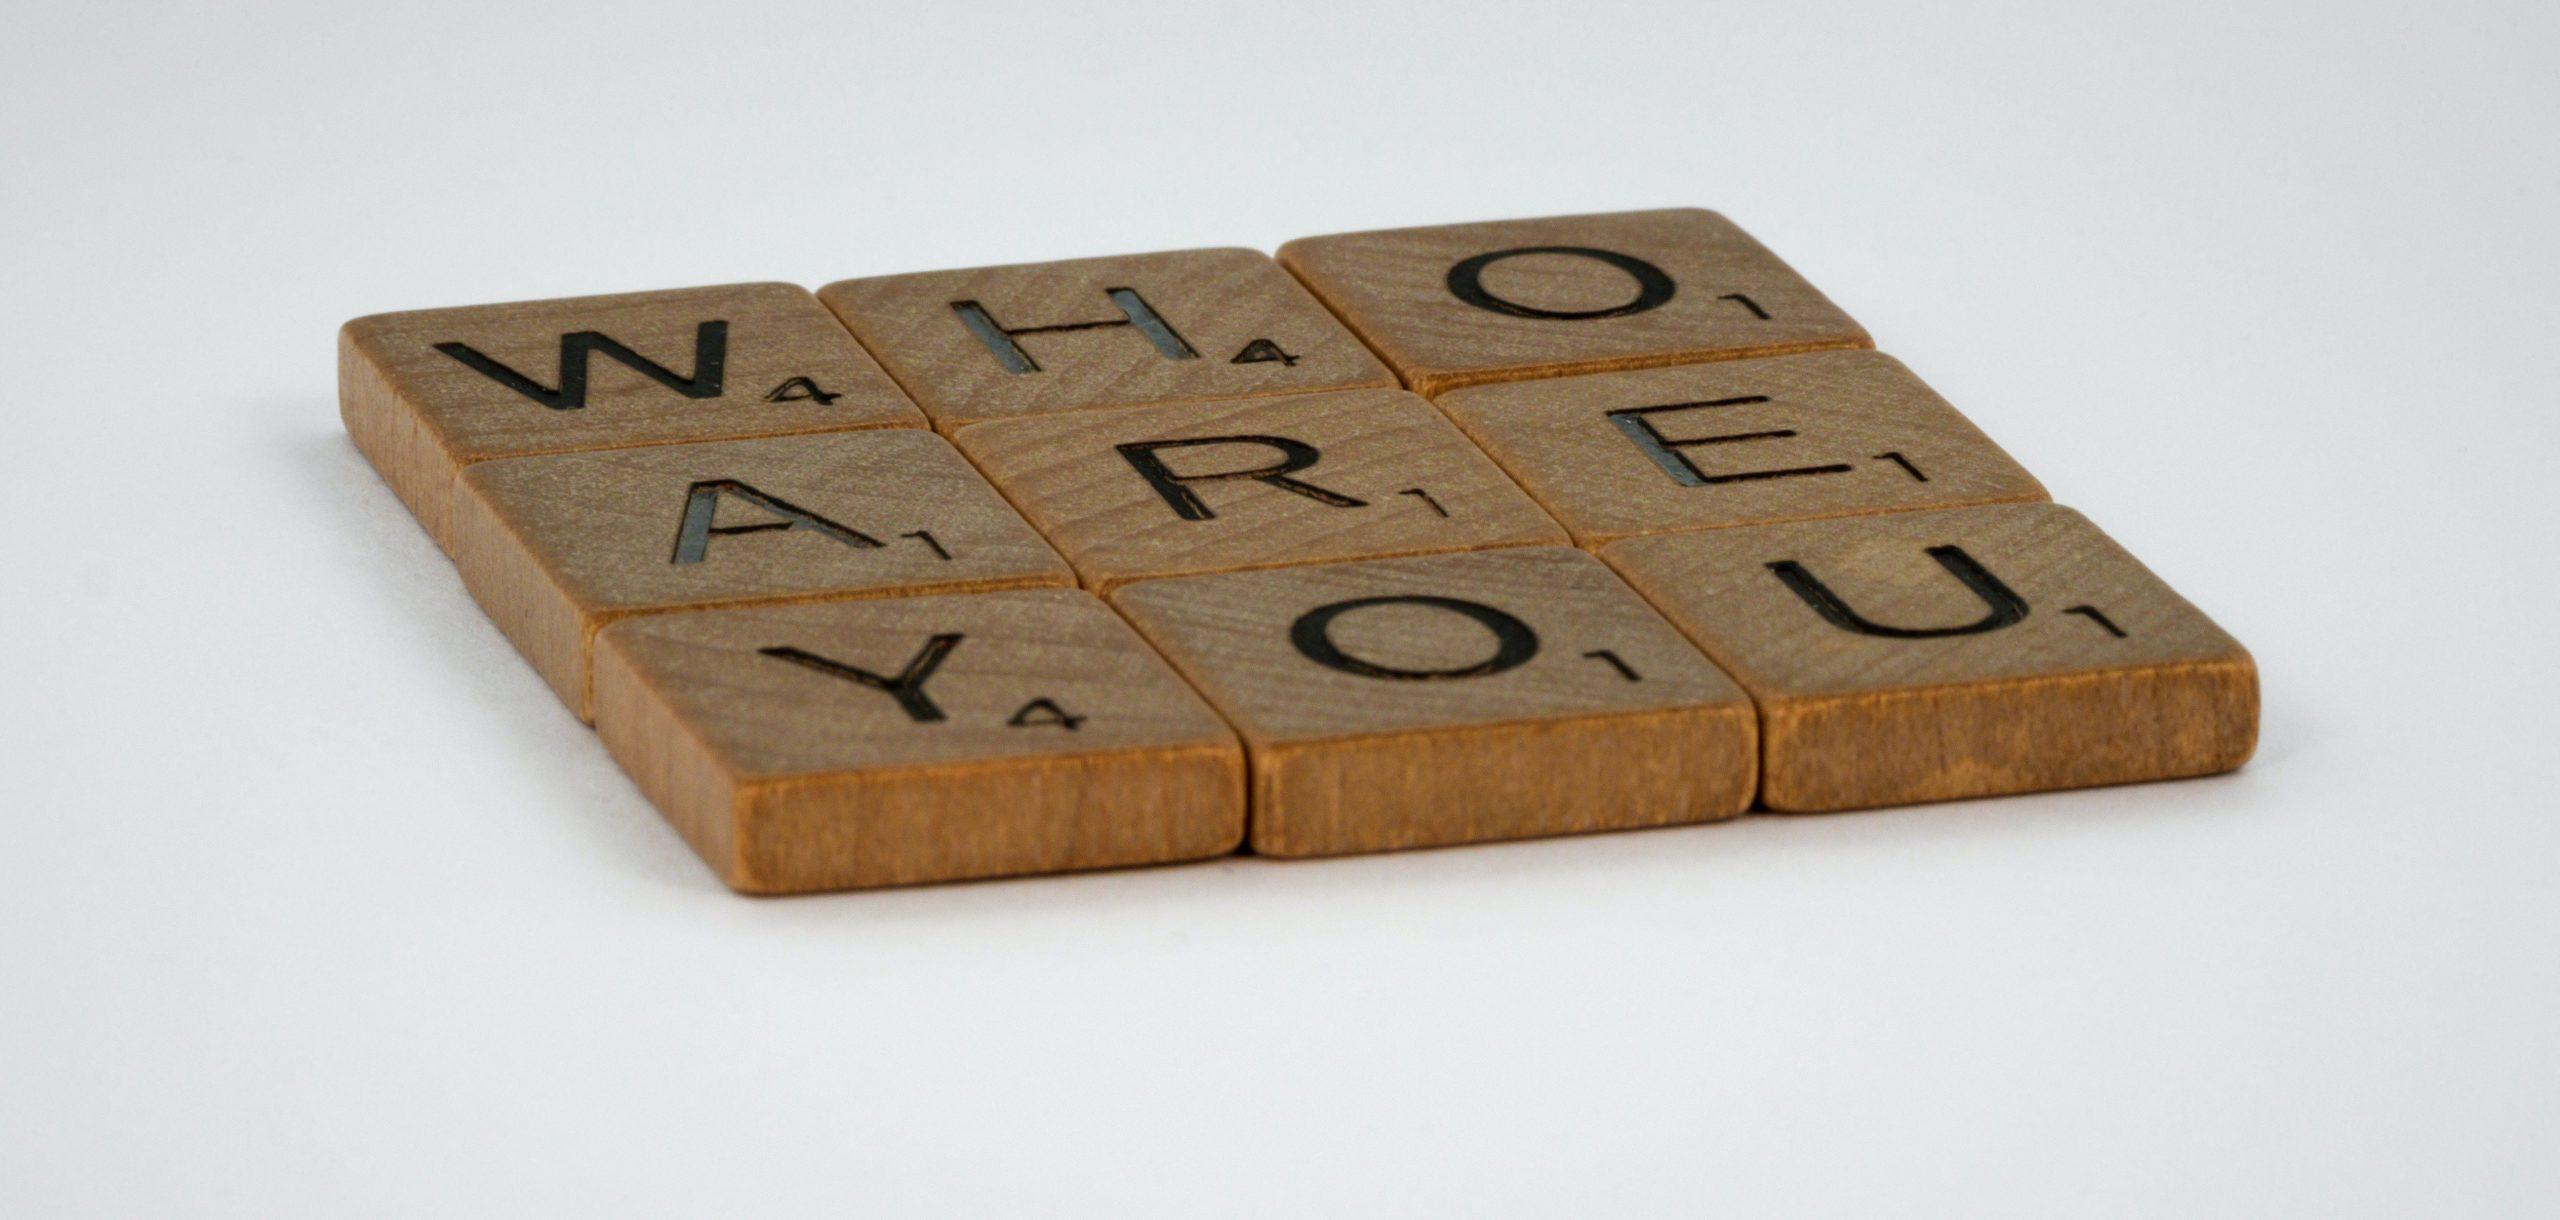 Scrabble letters creating the words 'who are you'.